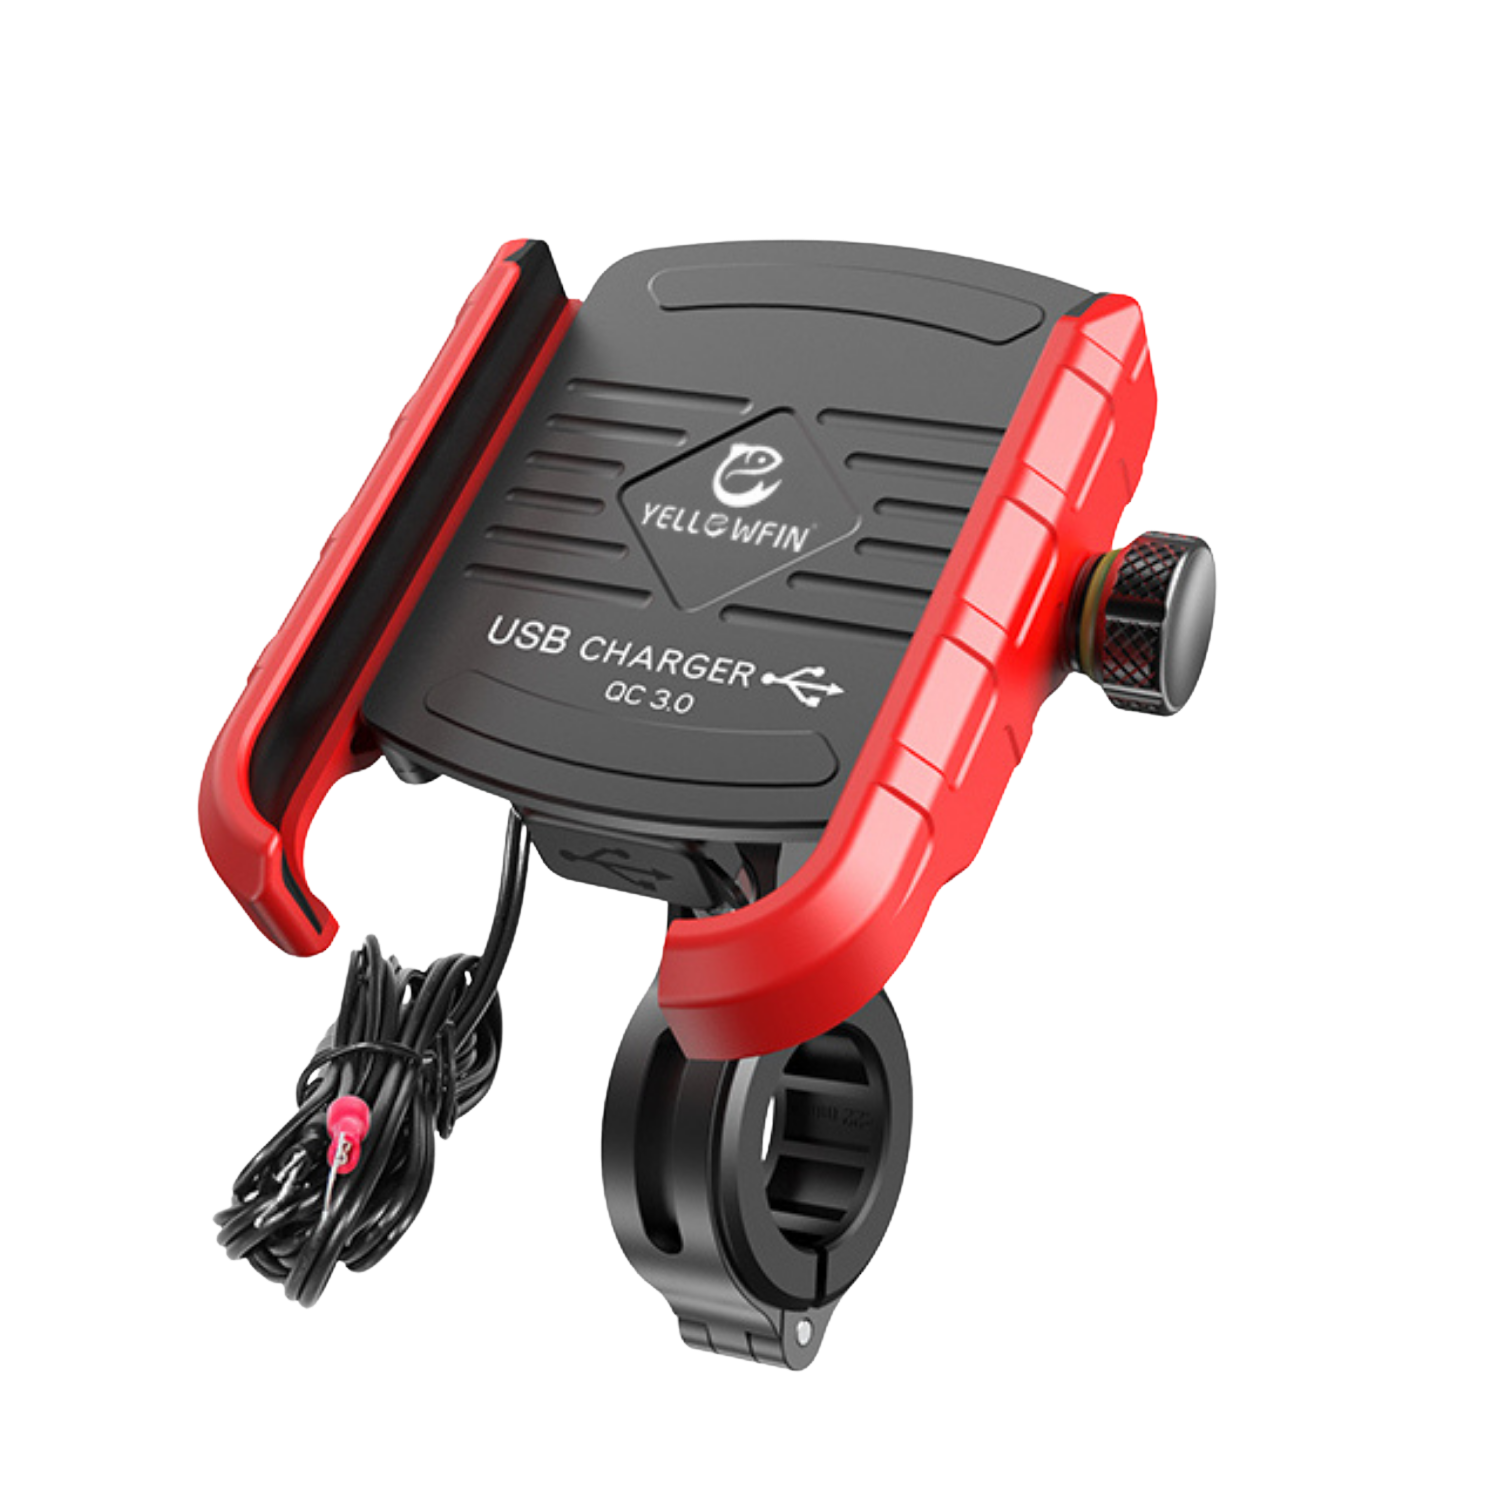 Jaw-grip Fast QC 3.0 charger for Bikes & Scooters (Red)